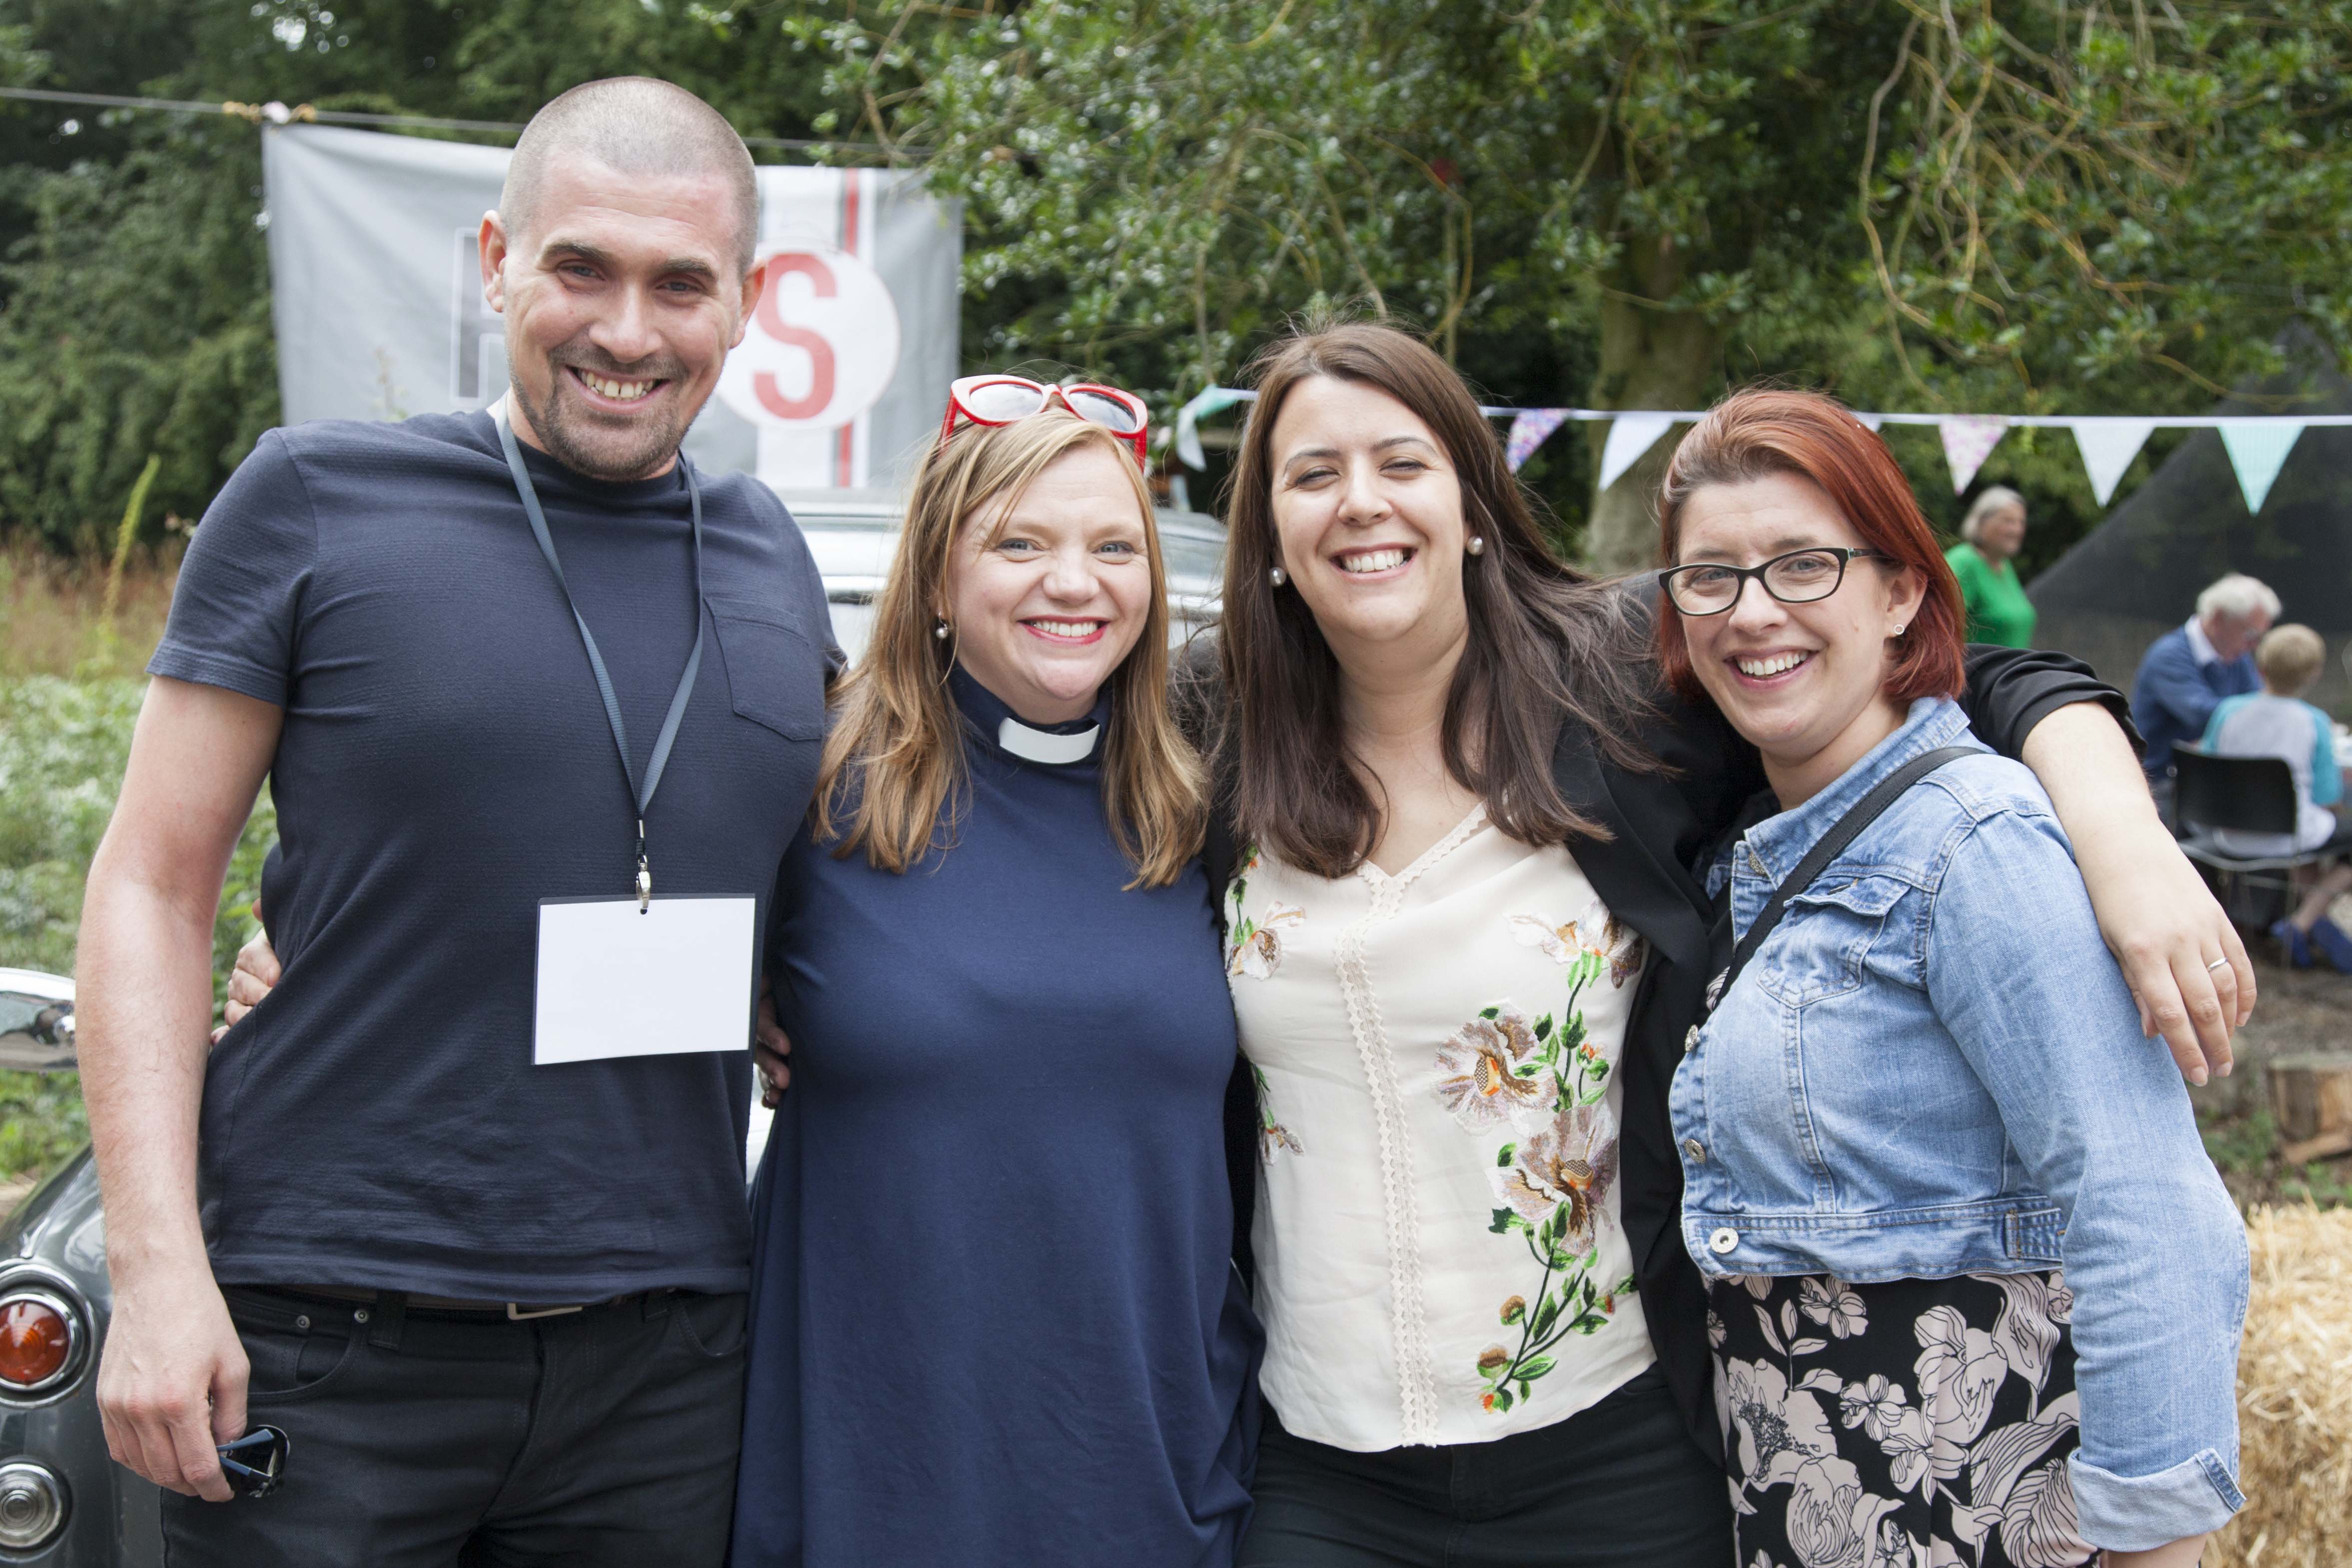 Jon, Laura and Libby with Revd Kate Bottley at the Diocese's Encourage Festival